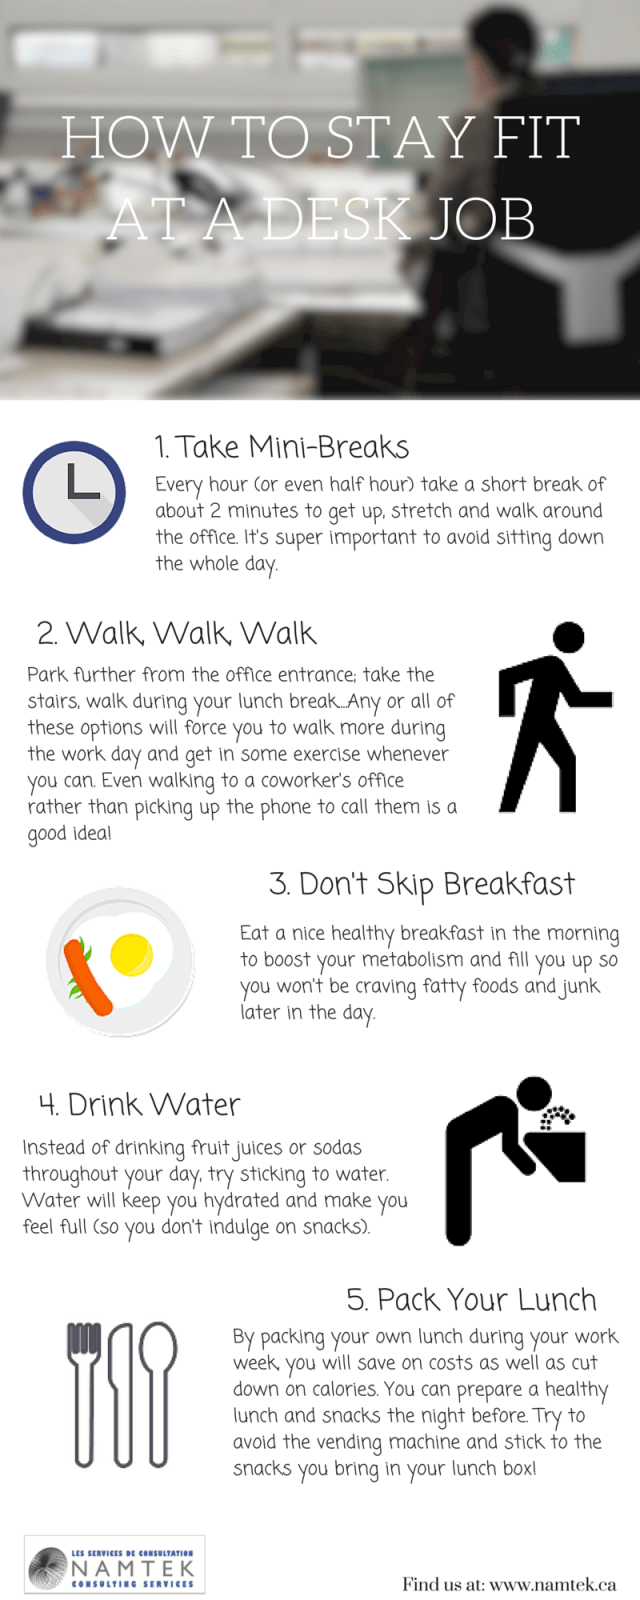 How To Stay Fit At A Desk Job